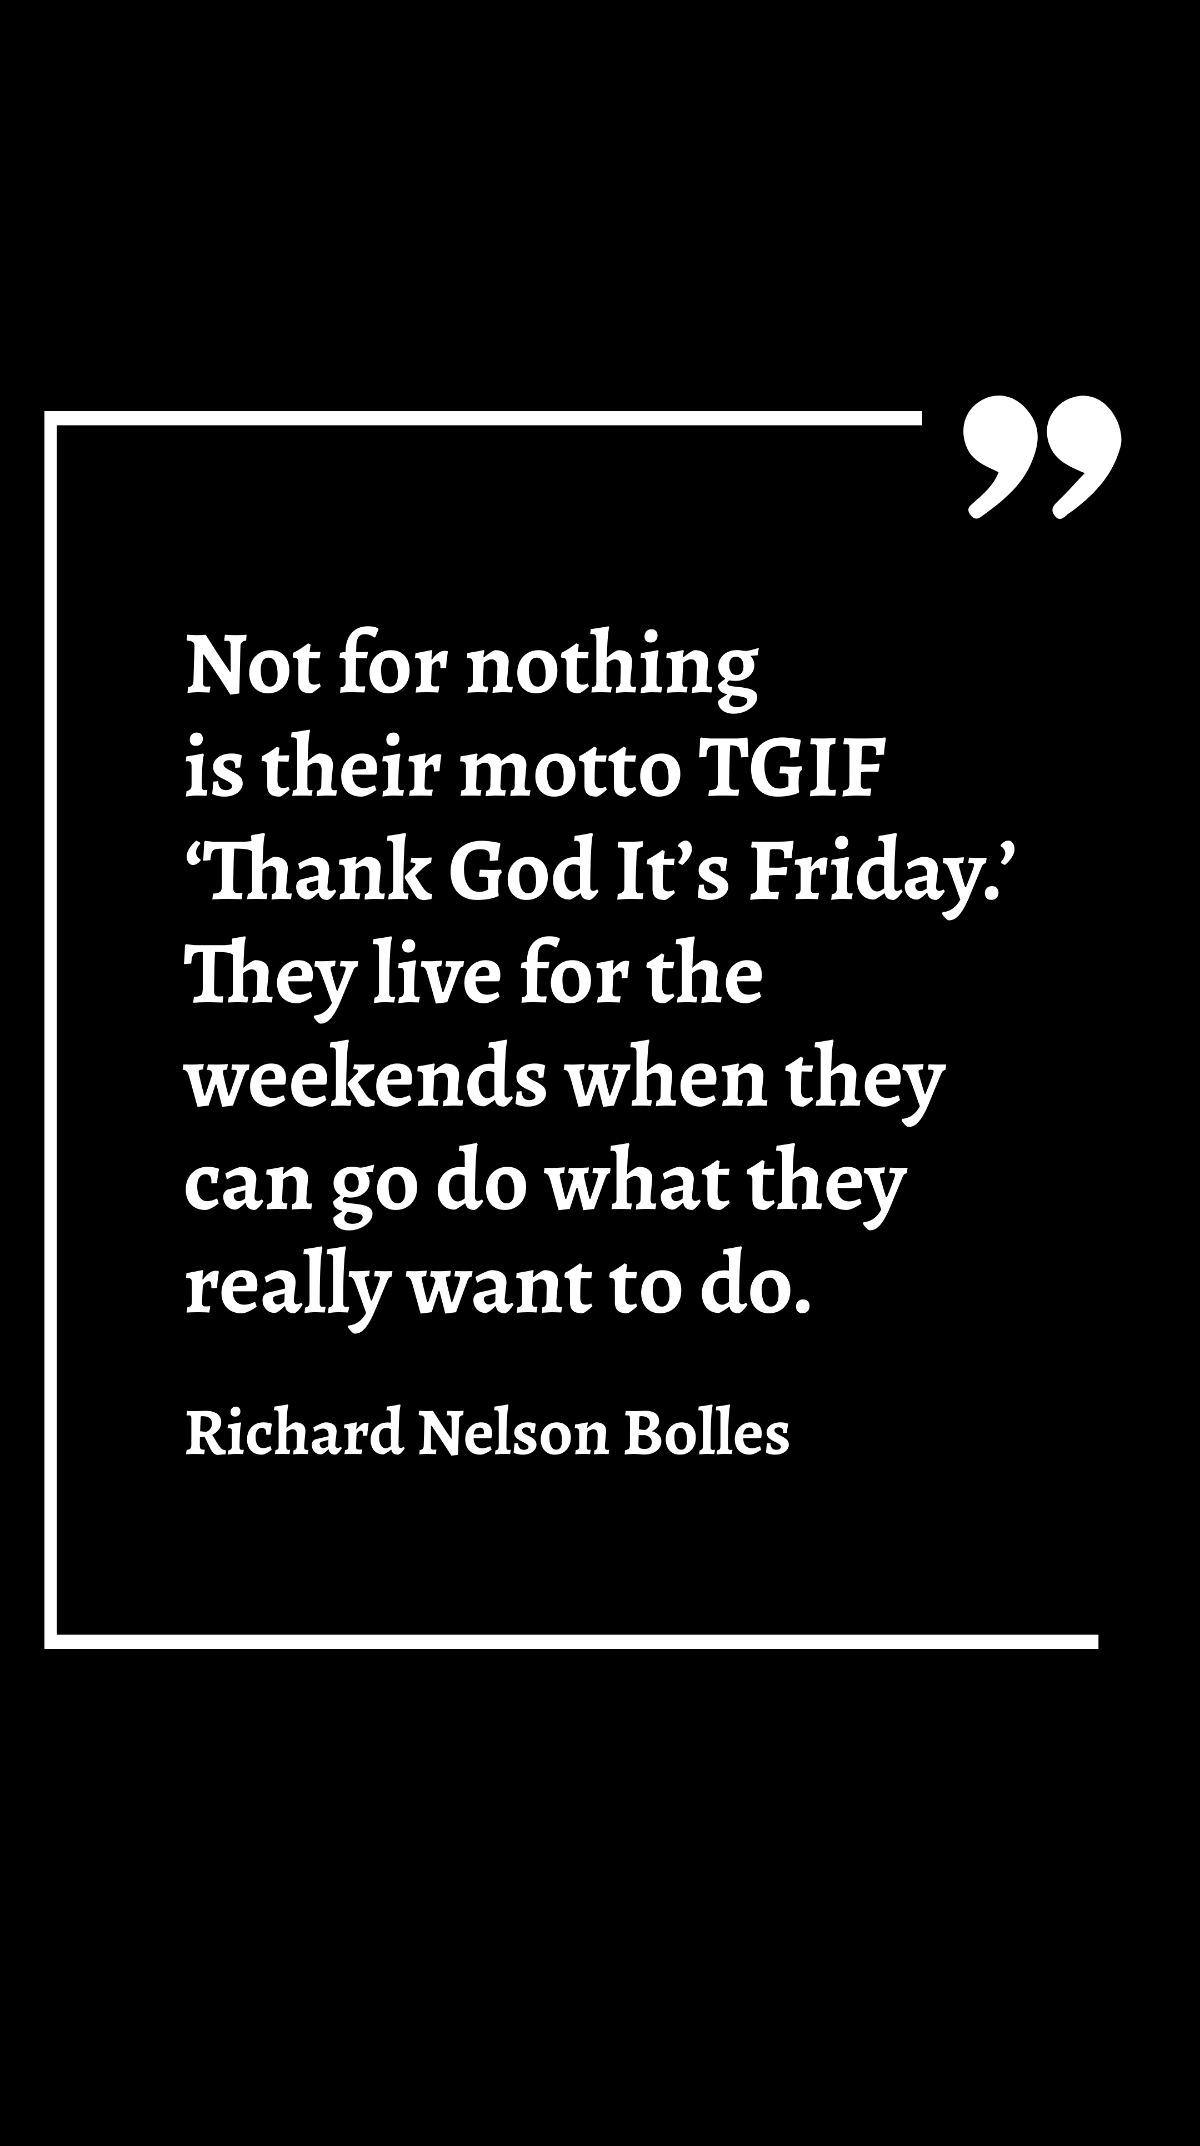 Richard Nelson Bolles - Not for nothing is their motto TGIF ‘Thank God It’s Friday.’ They live for the weekends when they can go do what they really want to do. Template